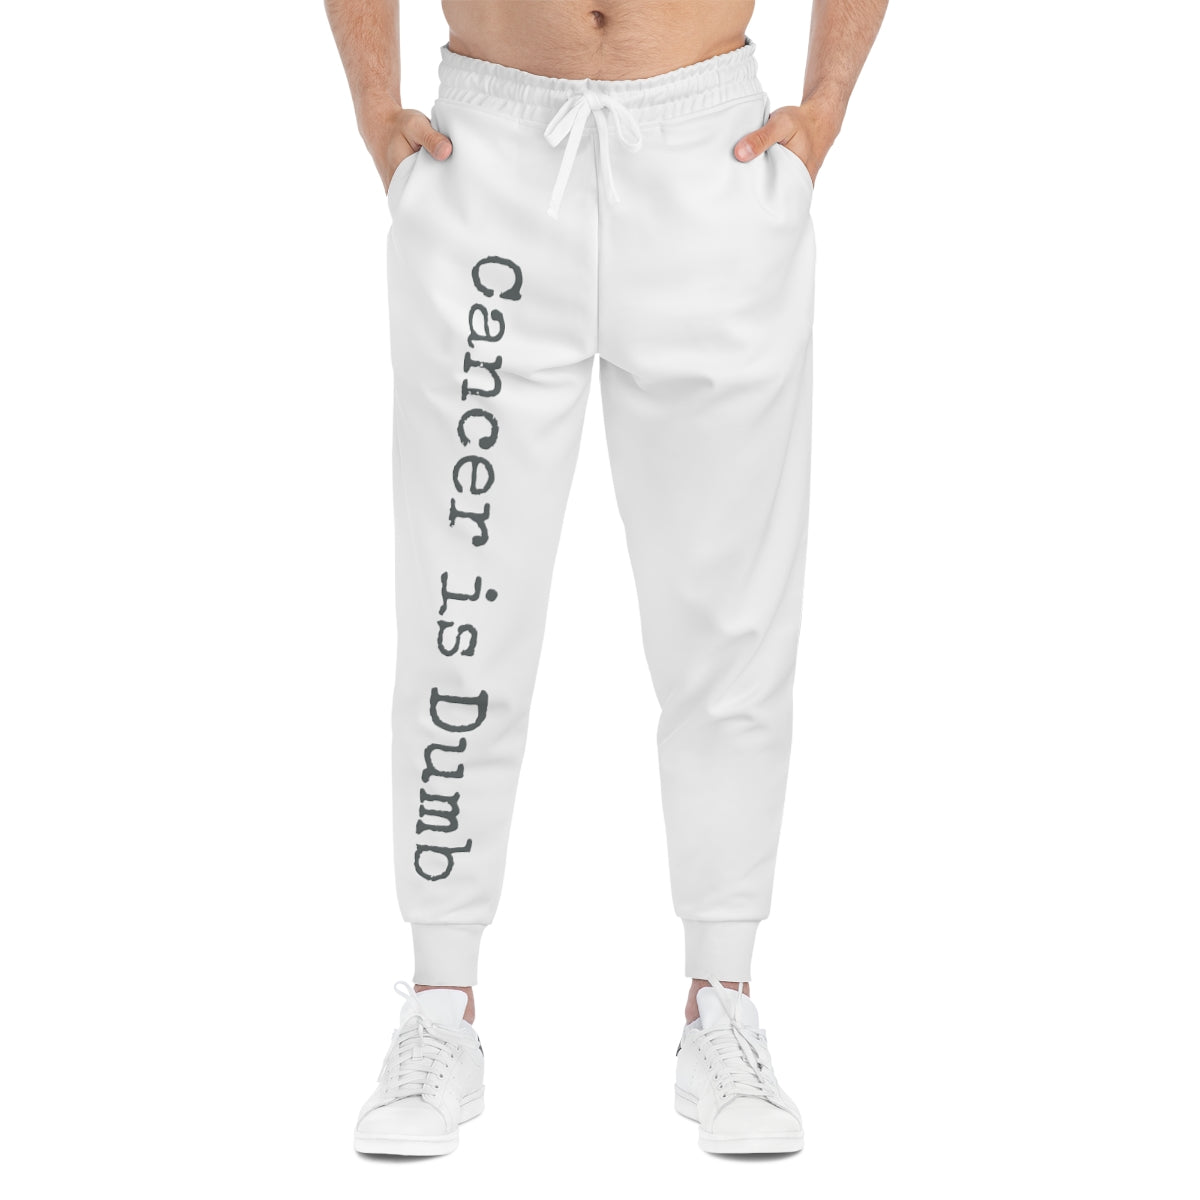 Anti Cancer Athletic Joggers Survivor Cancer is Dumb Fitness Gym Clothing